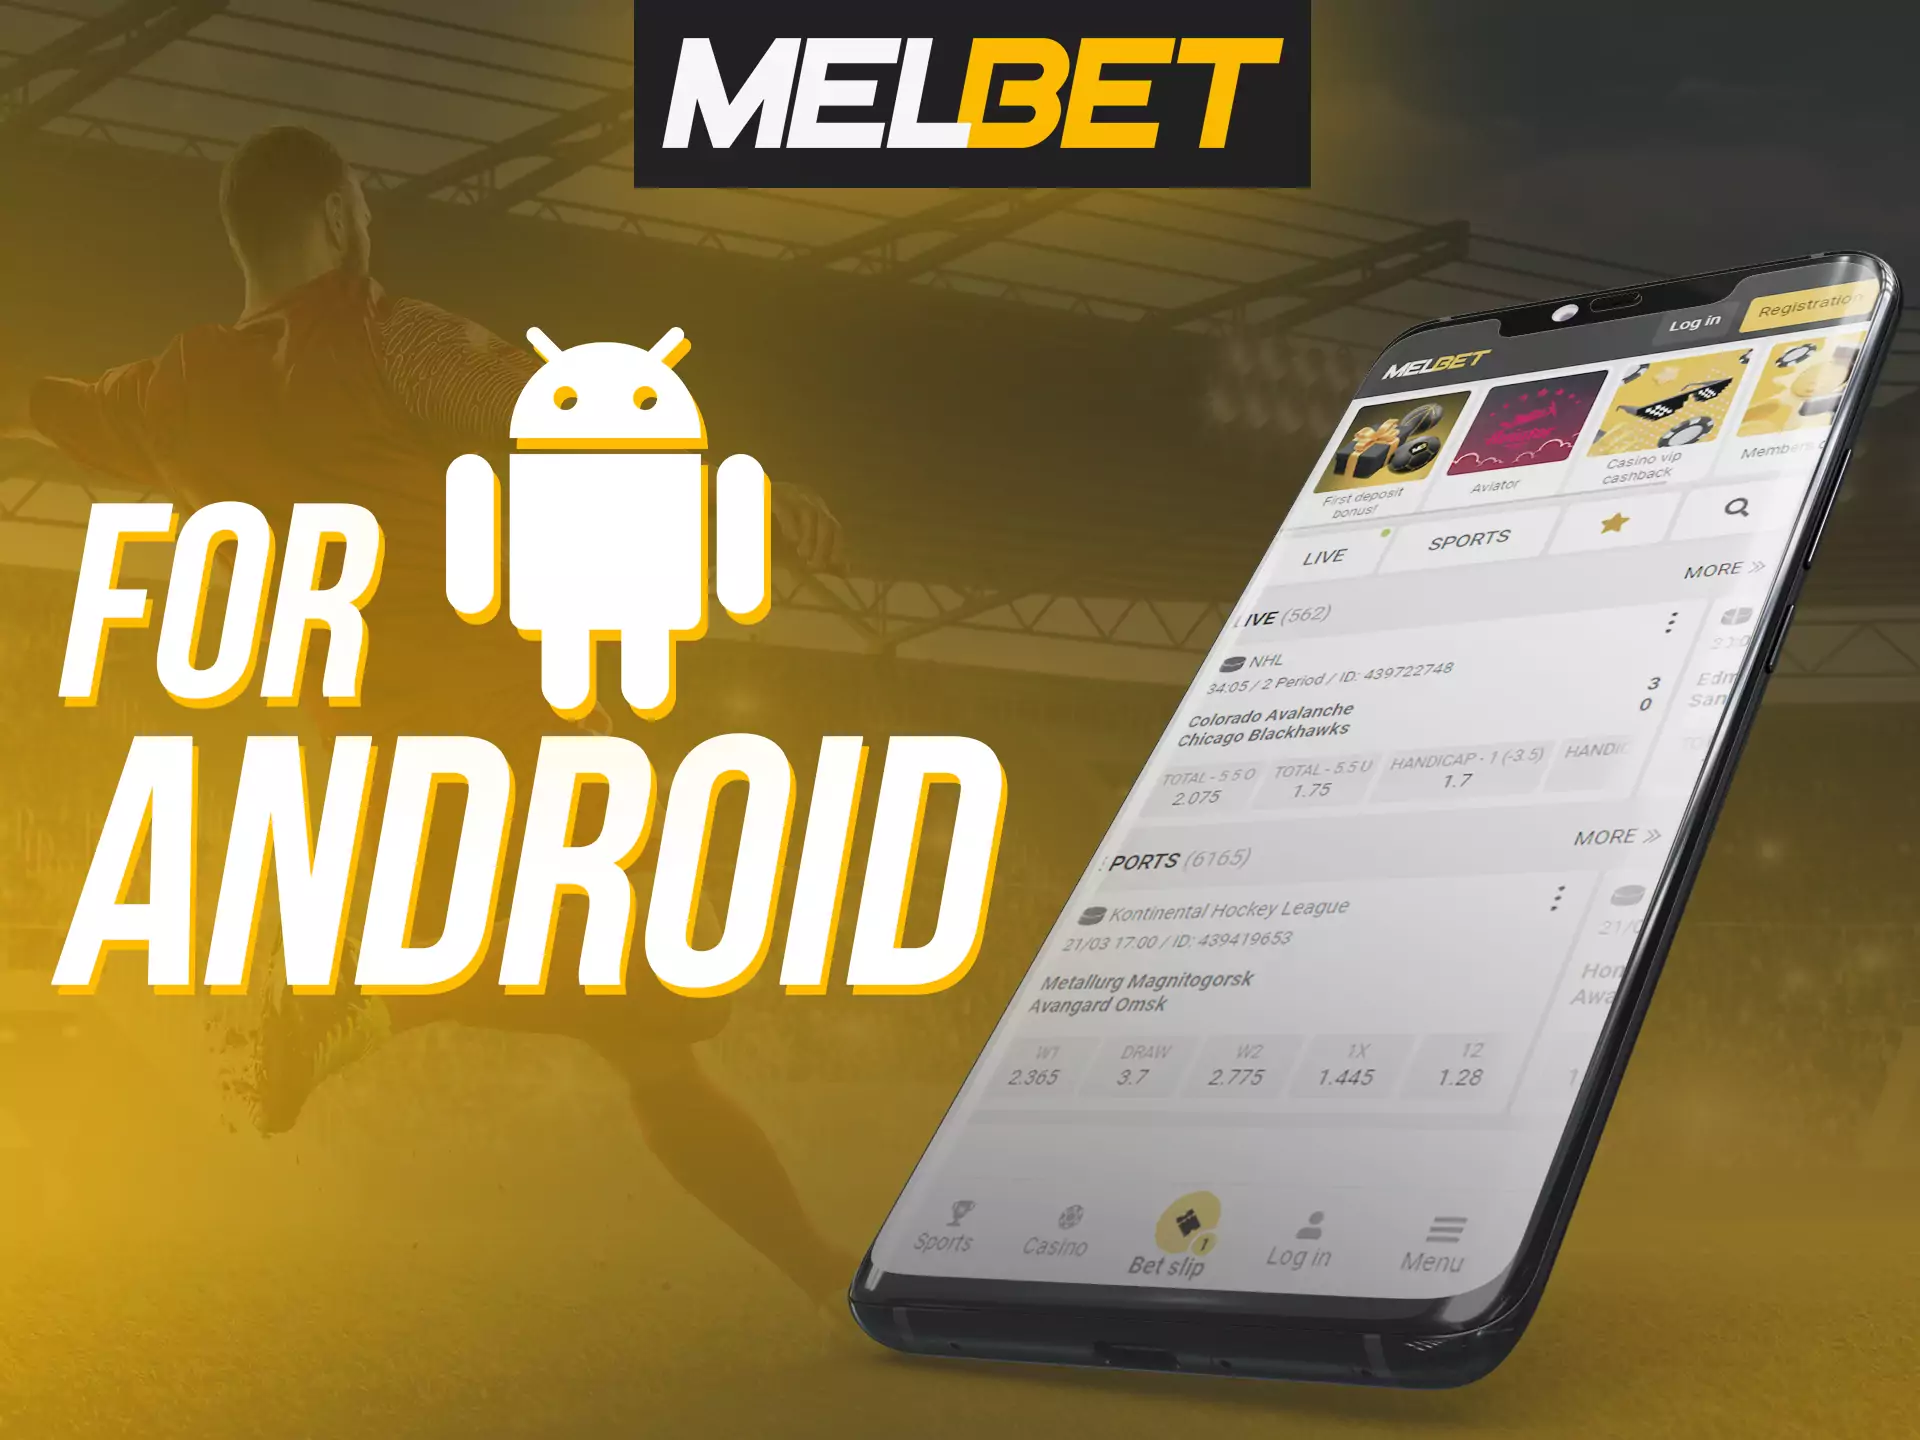 You can use the Melbet app on your Android device.